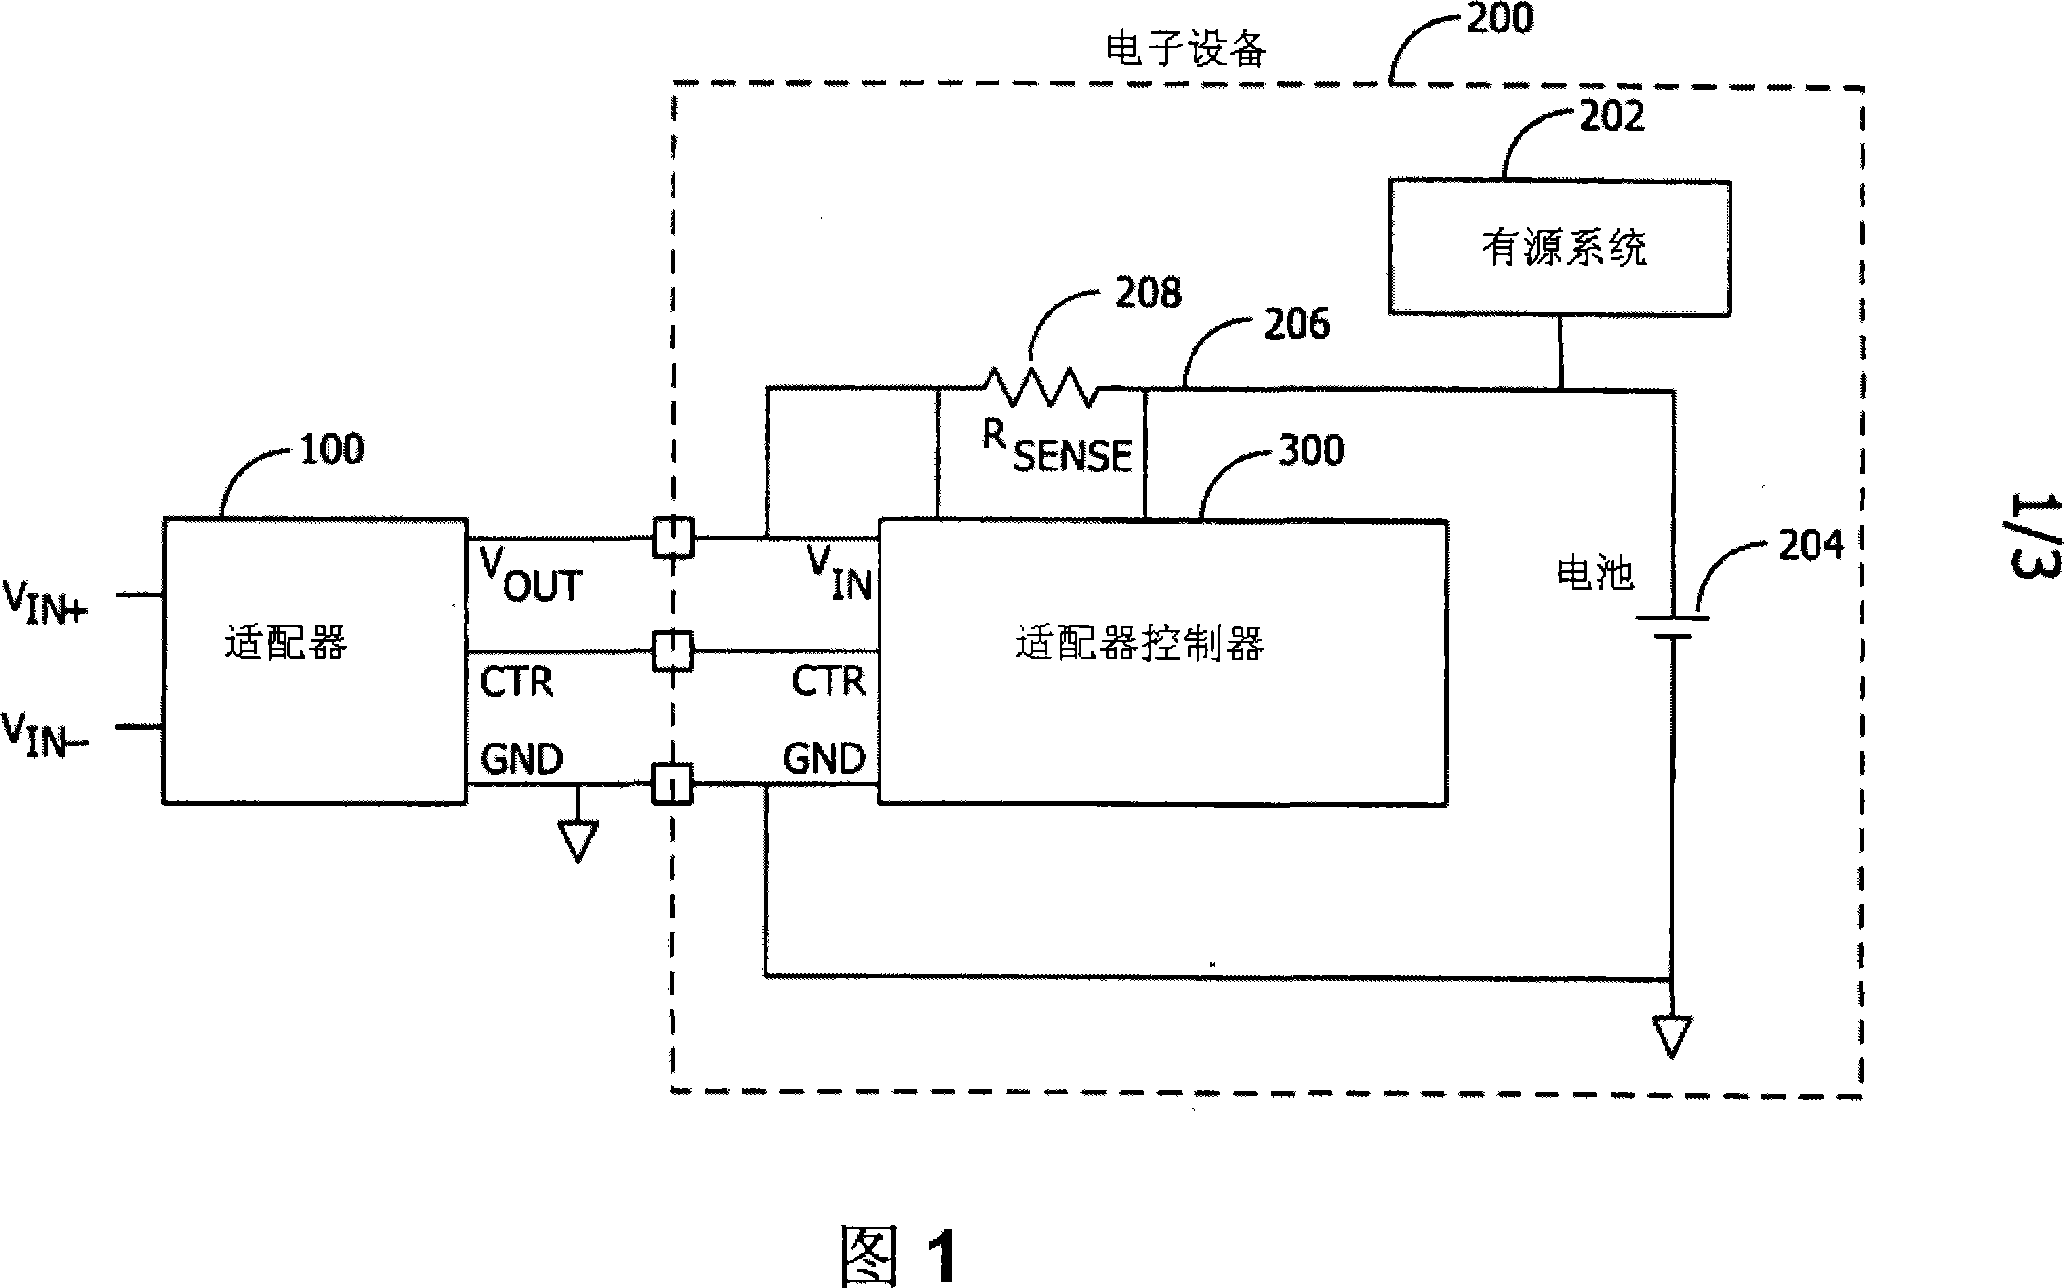 Power supply topology with power limiting feedback loop